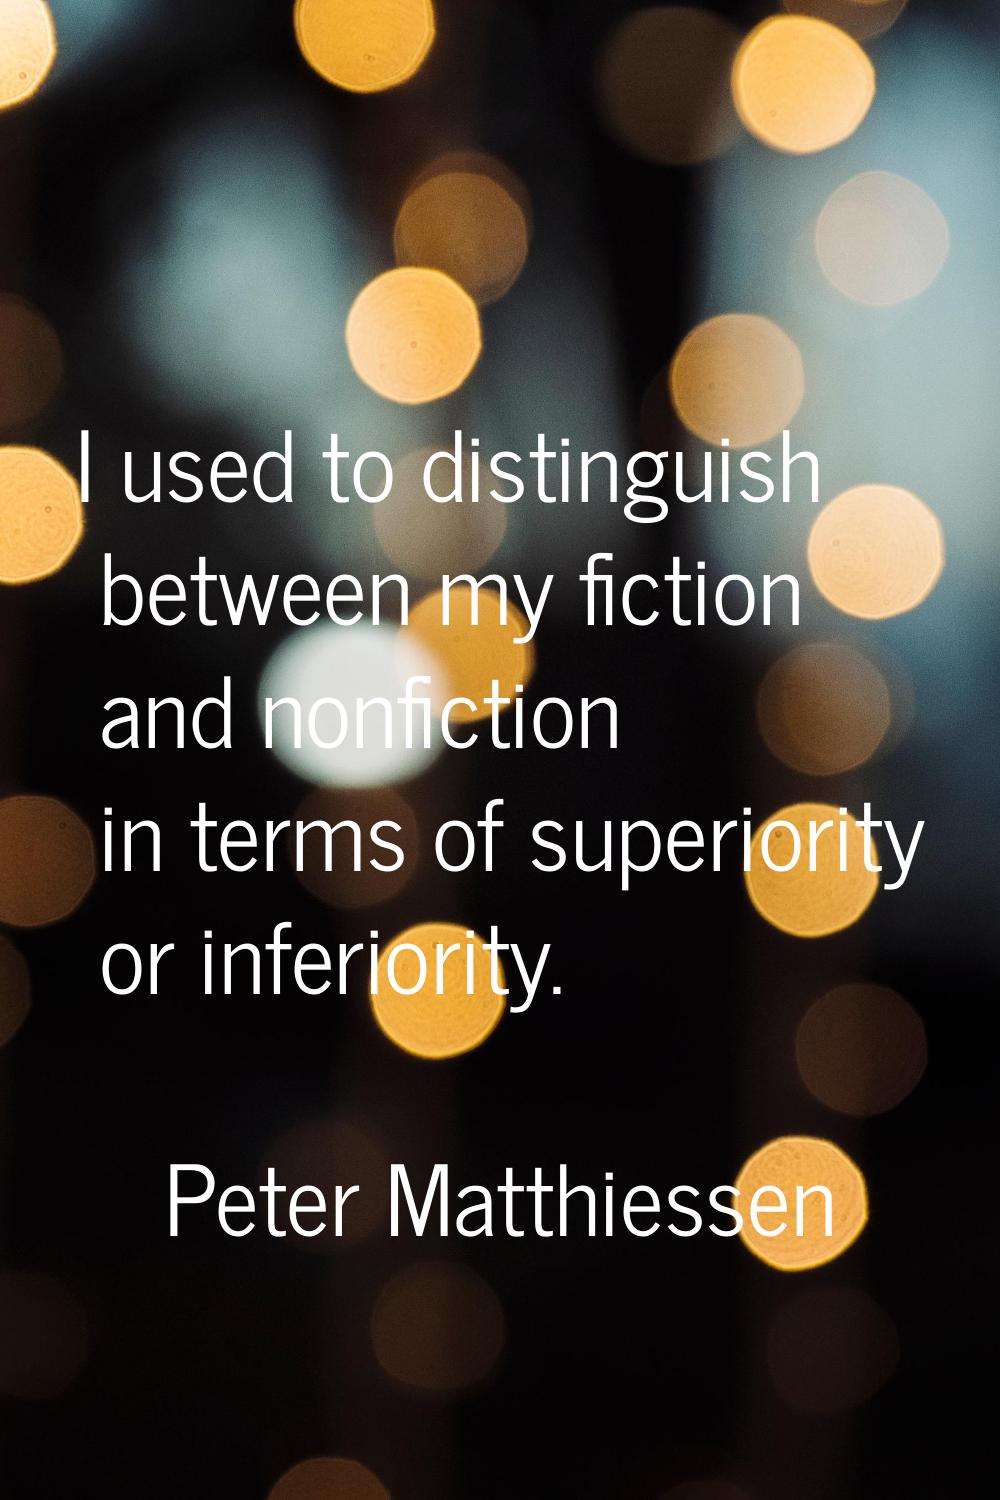 I used to distinguish between my fiction and nonfiction in terms of superiority or inferiority.